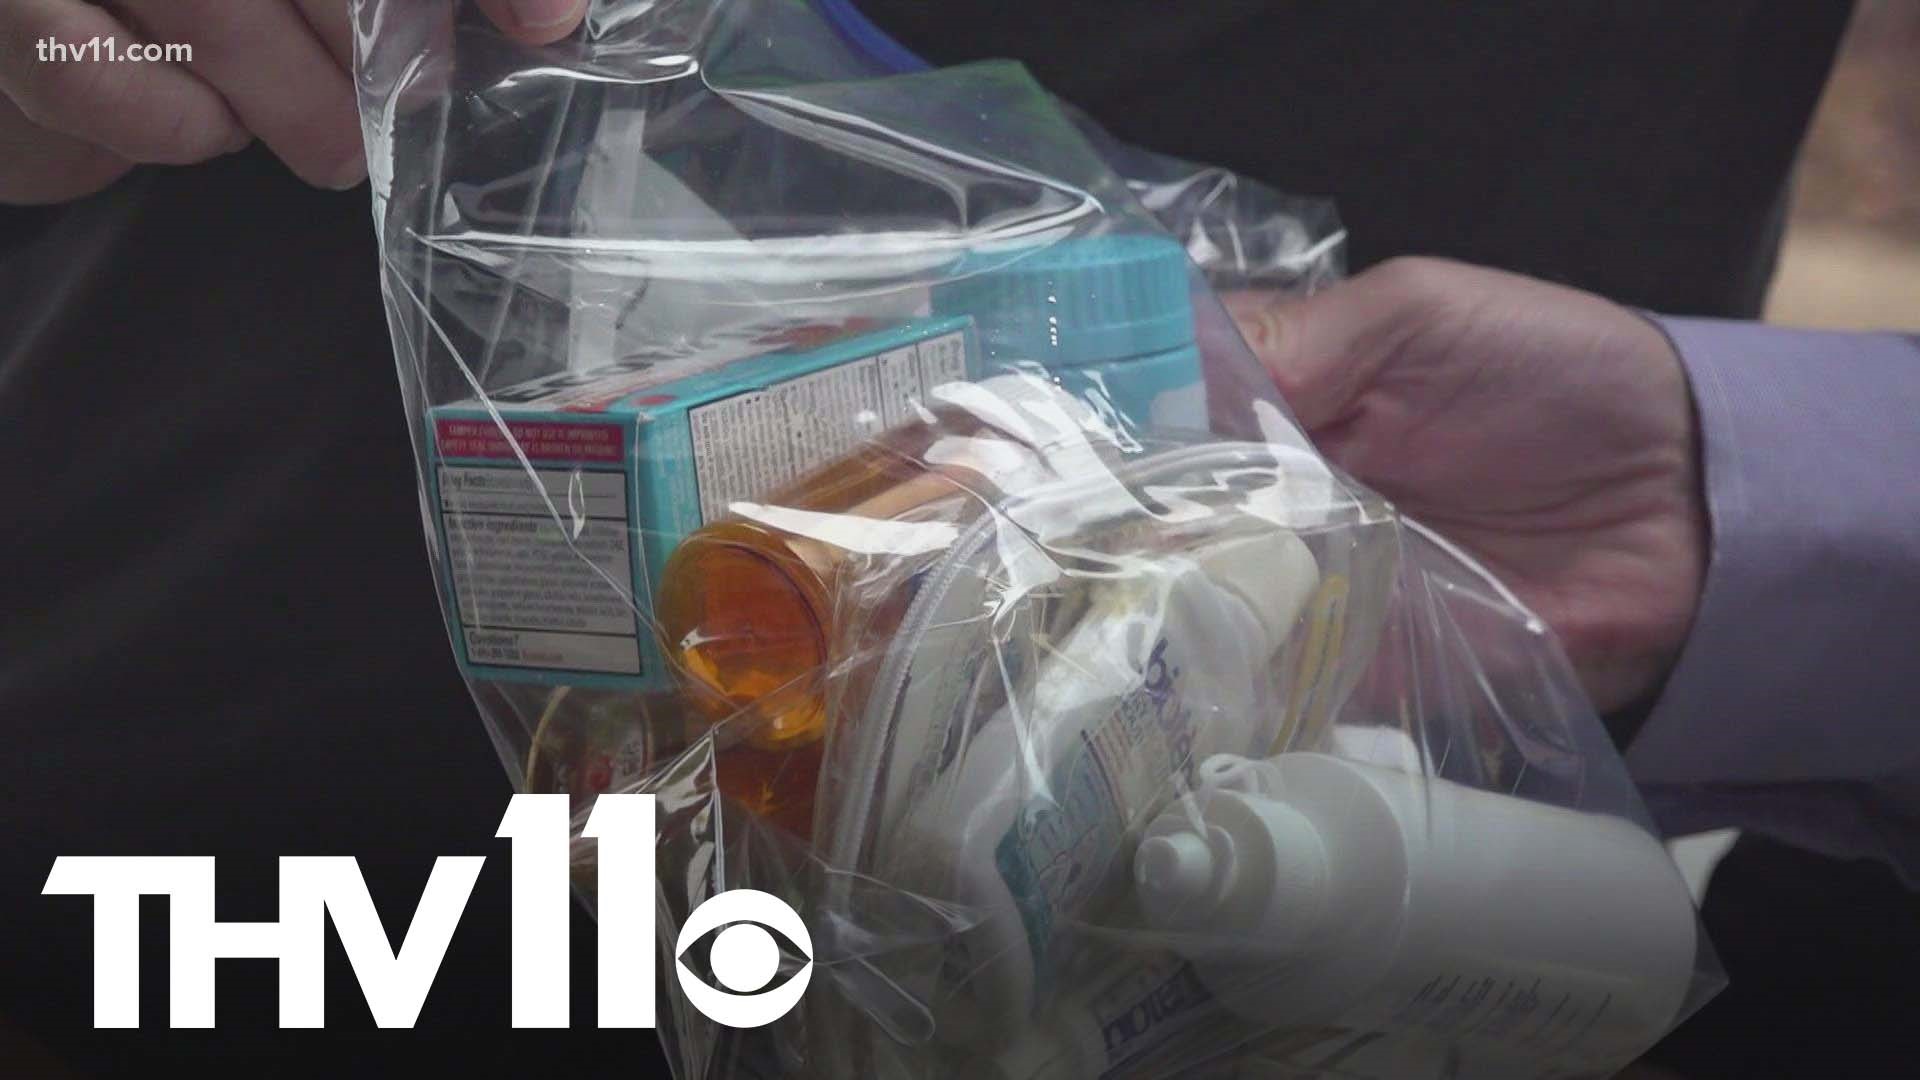 Every year Arkansans drop off unwanted medication in part of 'Drug Take-Back Day,' and the state drug director says events like this are crucial.